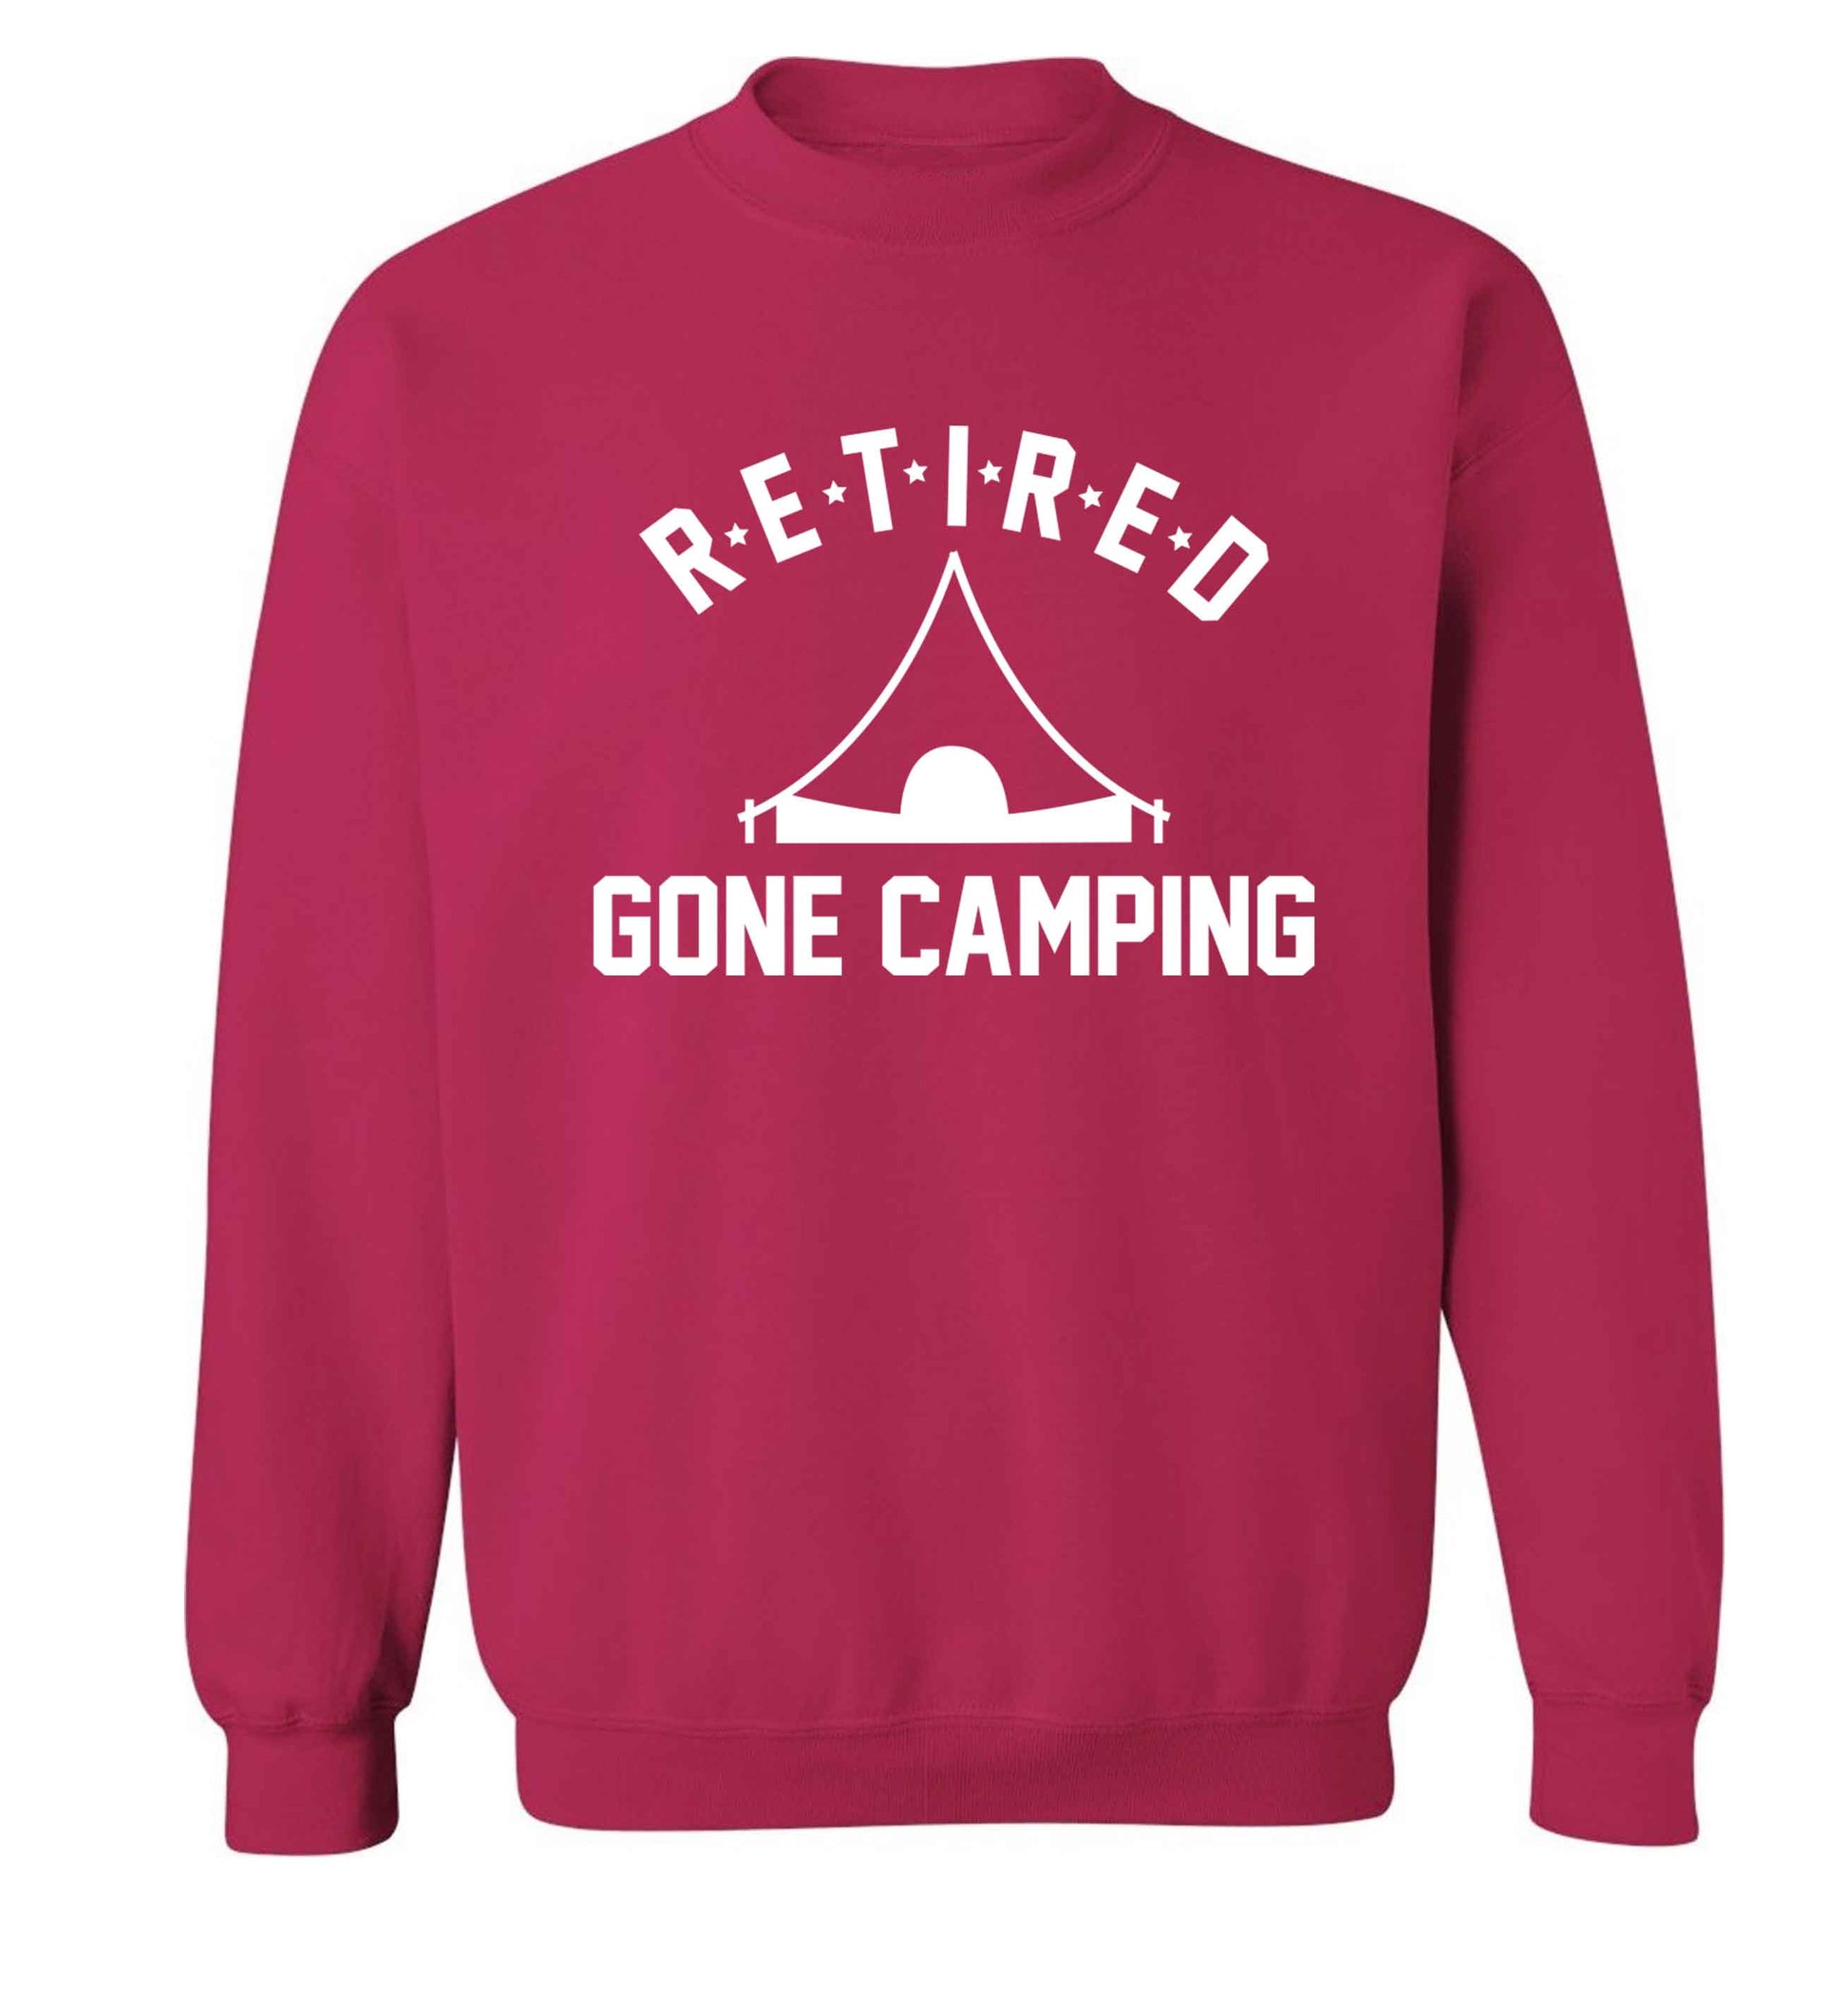 Retired gone camping Adult's unisex pink Sweater 2XL